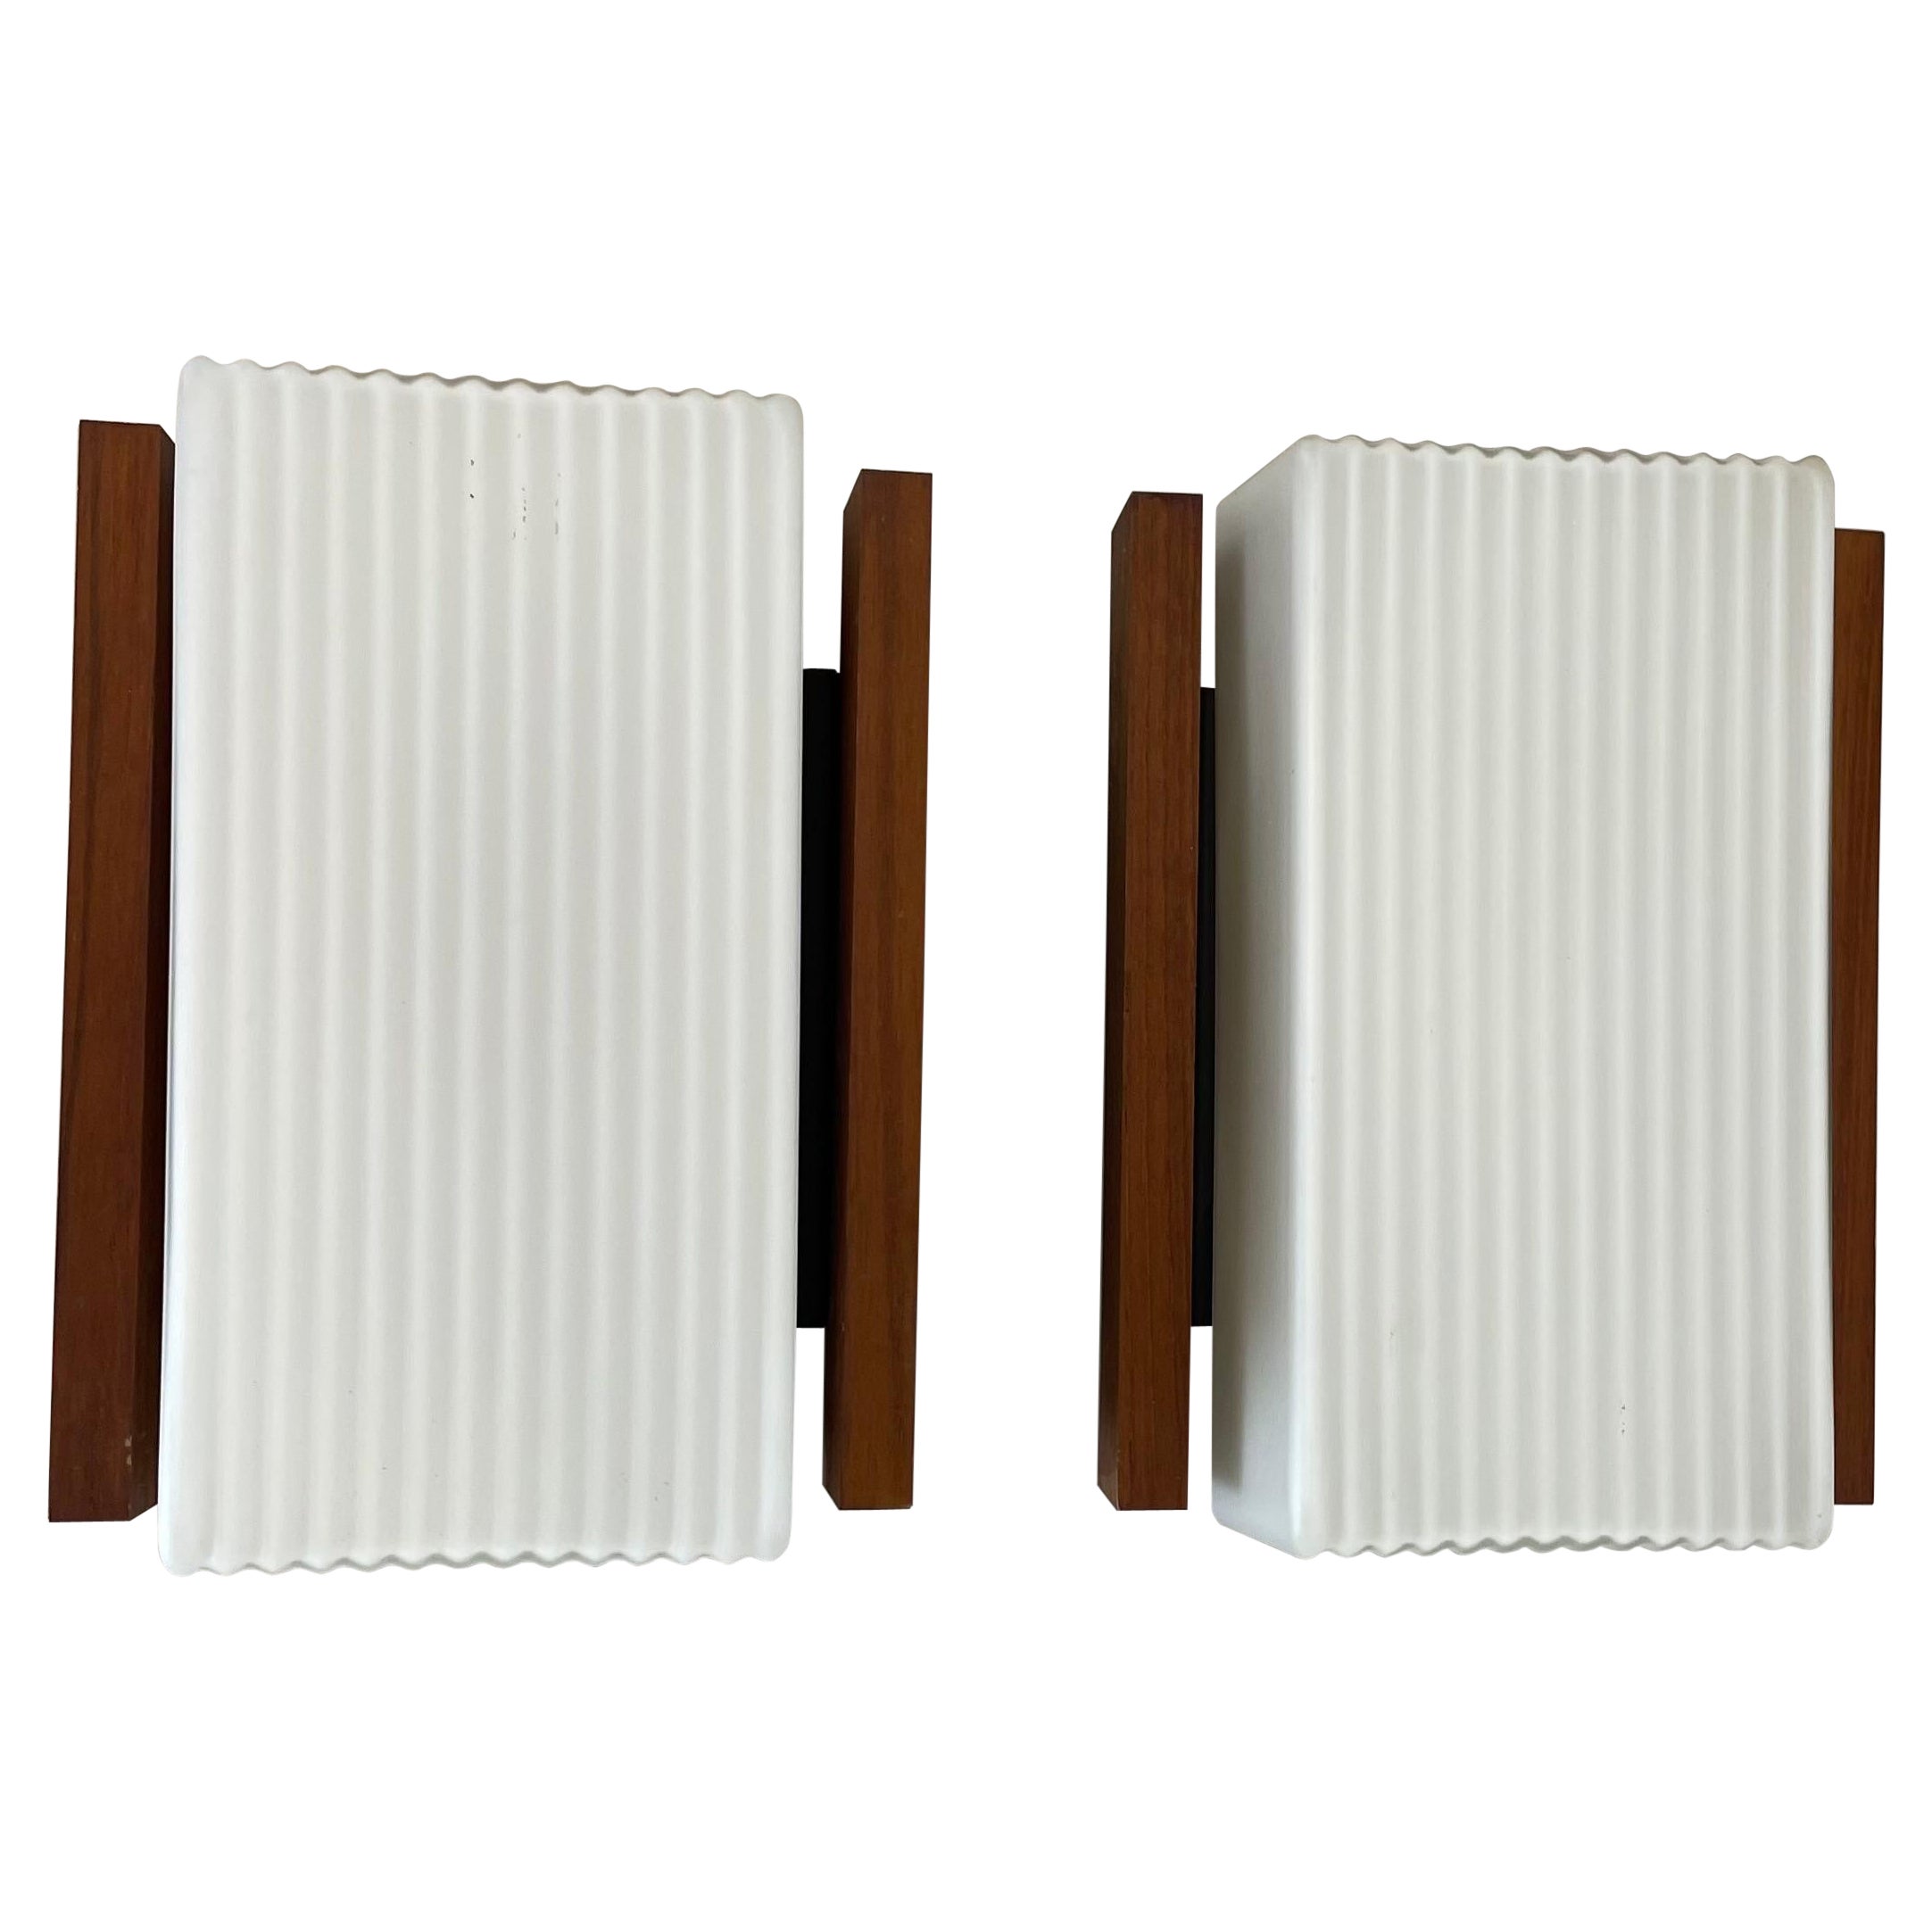 Set of 2 satin white glass and teak Wall Lights by BEGA Lights, Germany 1960s